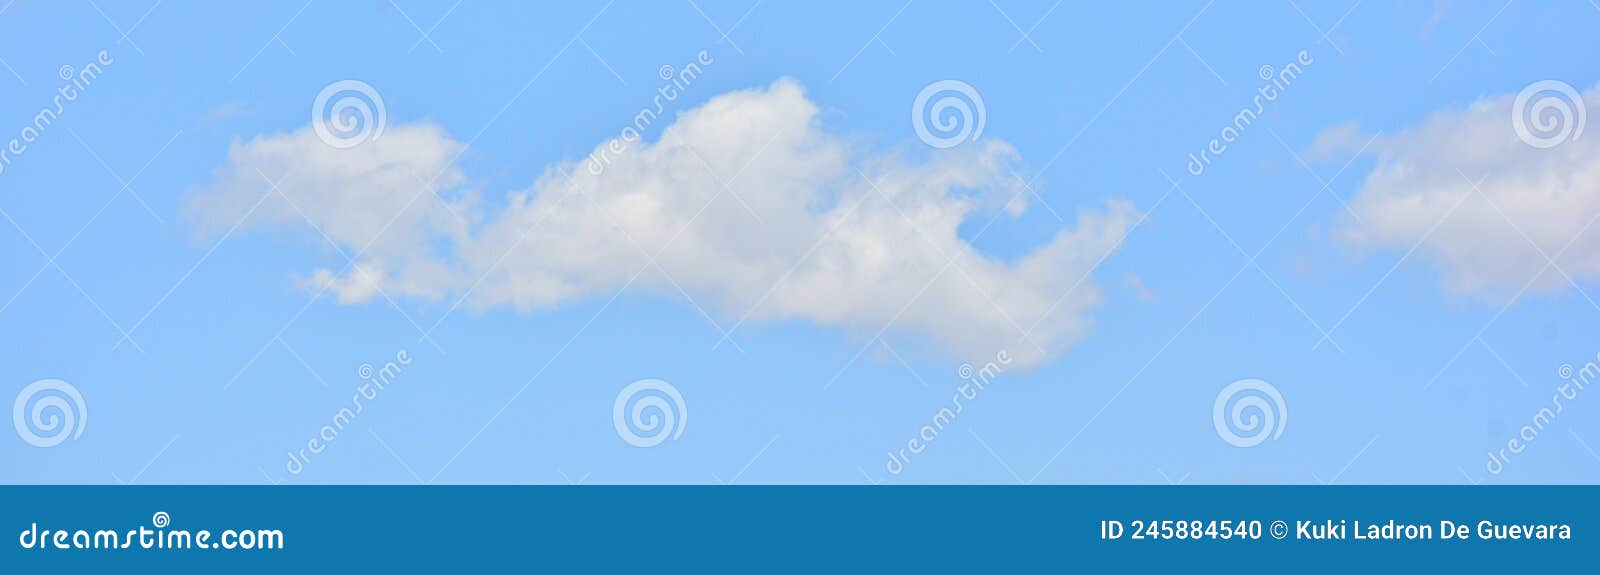 cloud formations in the blue sky